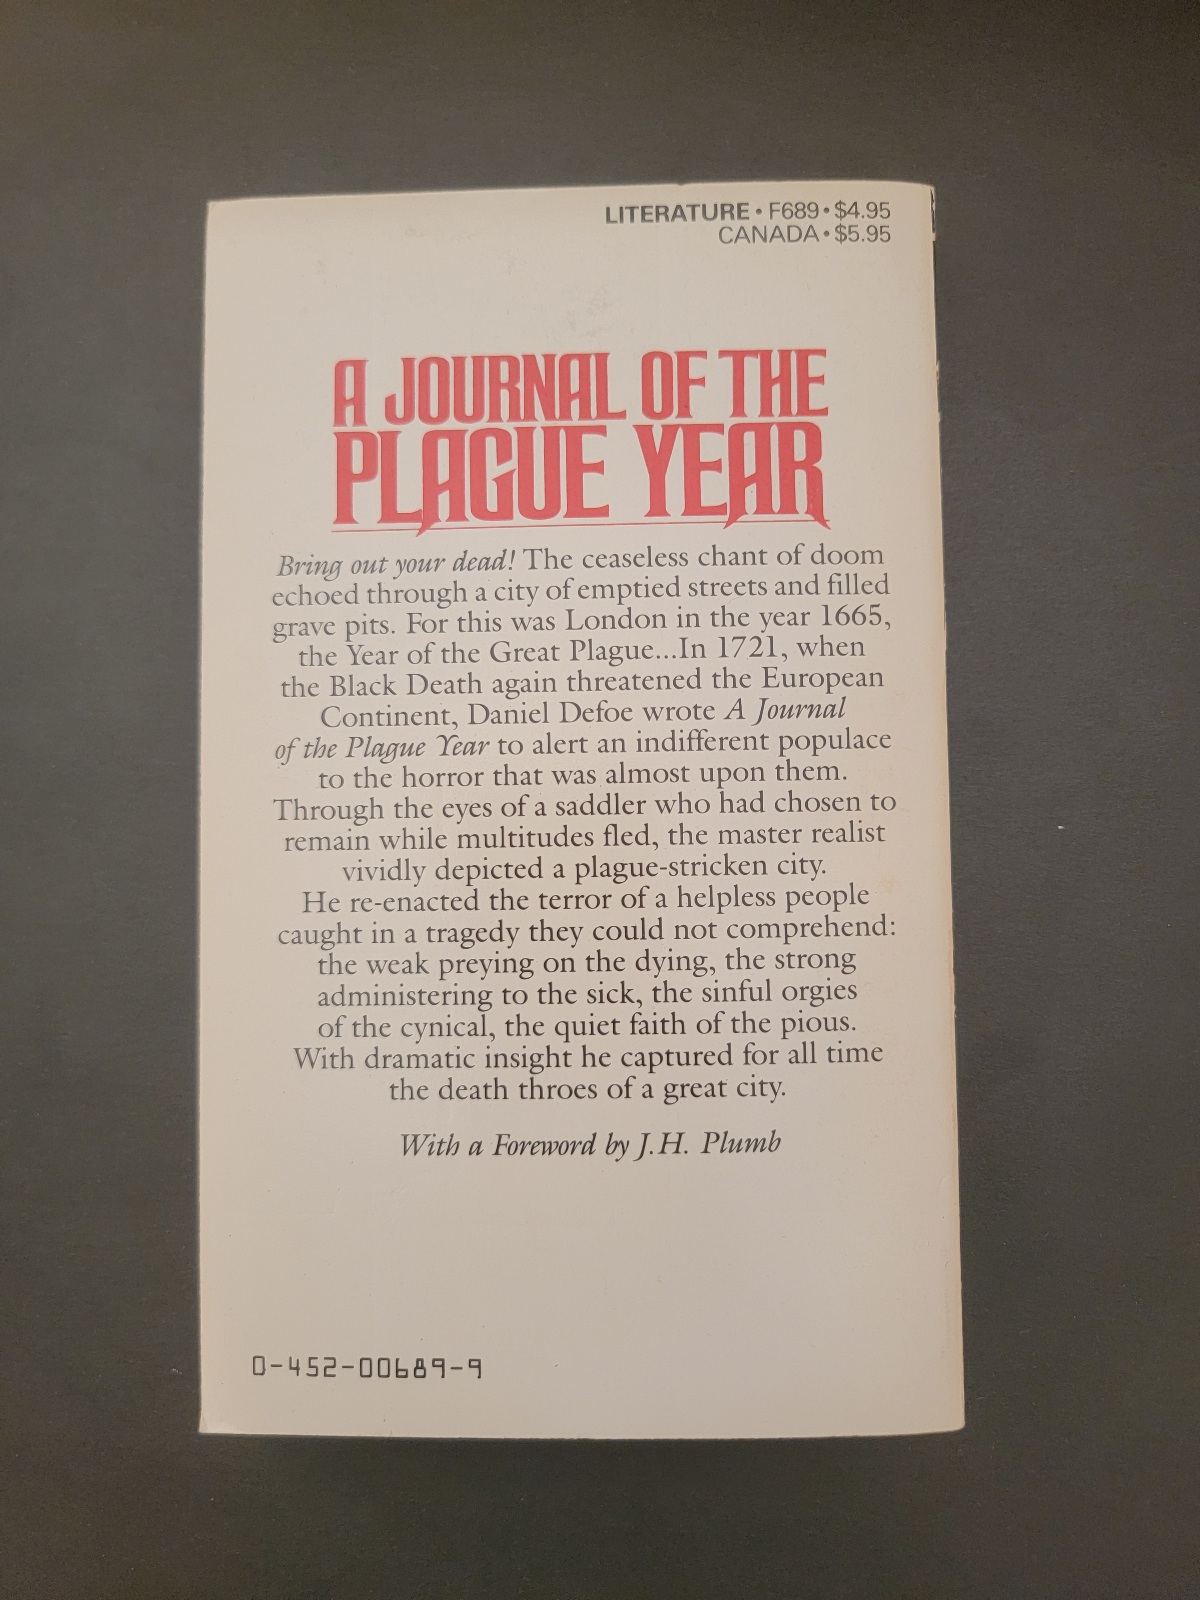 A Journal of the Plague Year by Daniel Defoe 1984 Meridian Classic Paperback